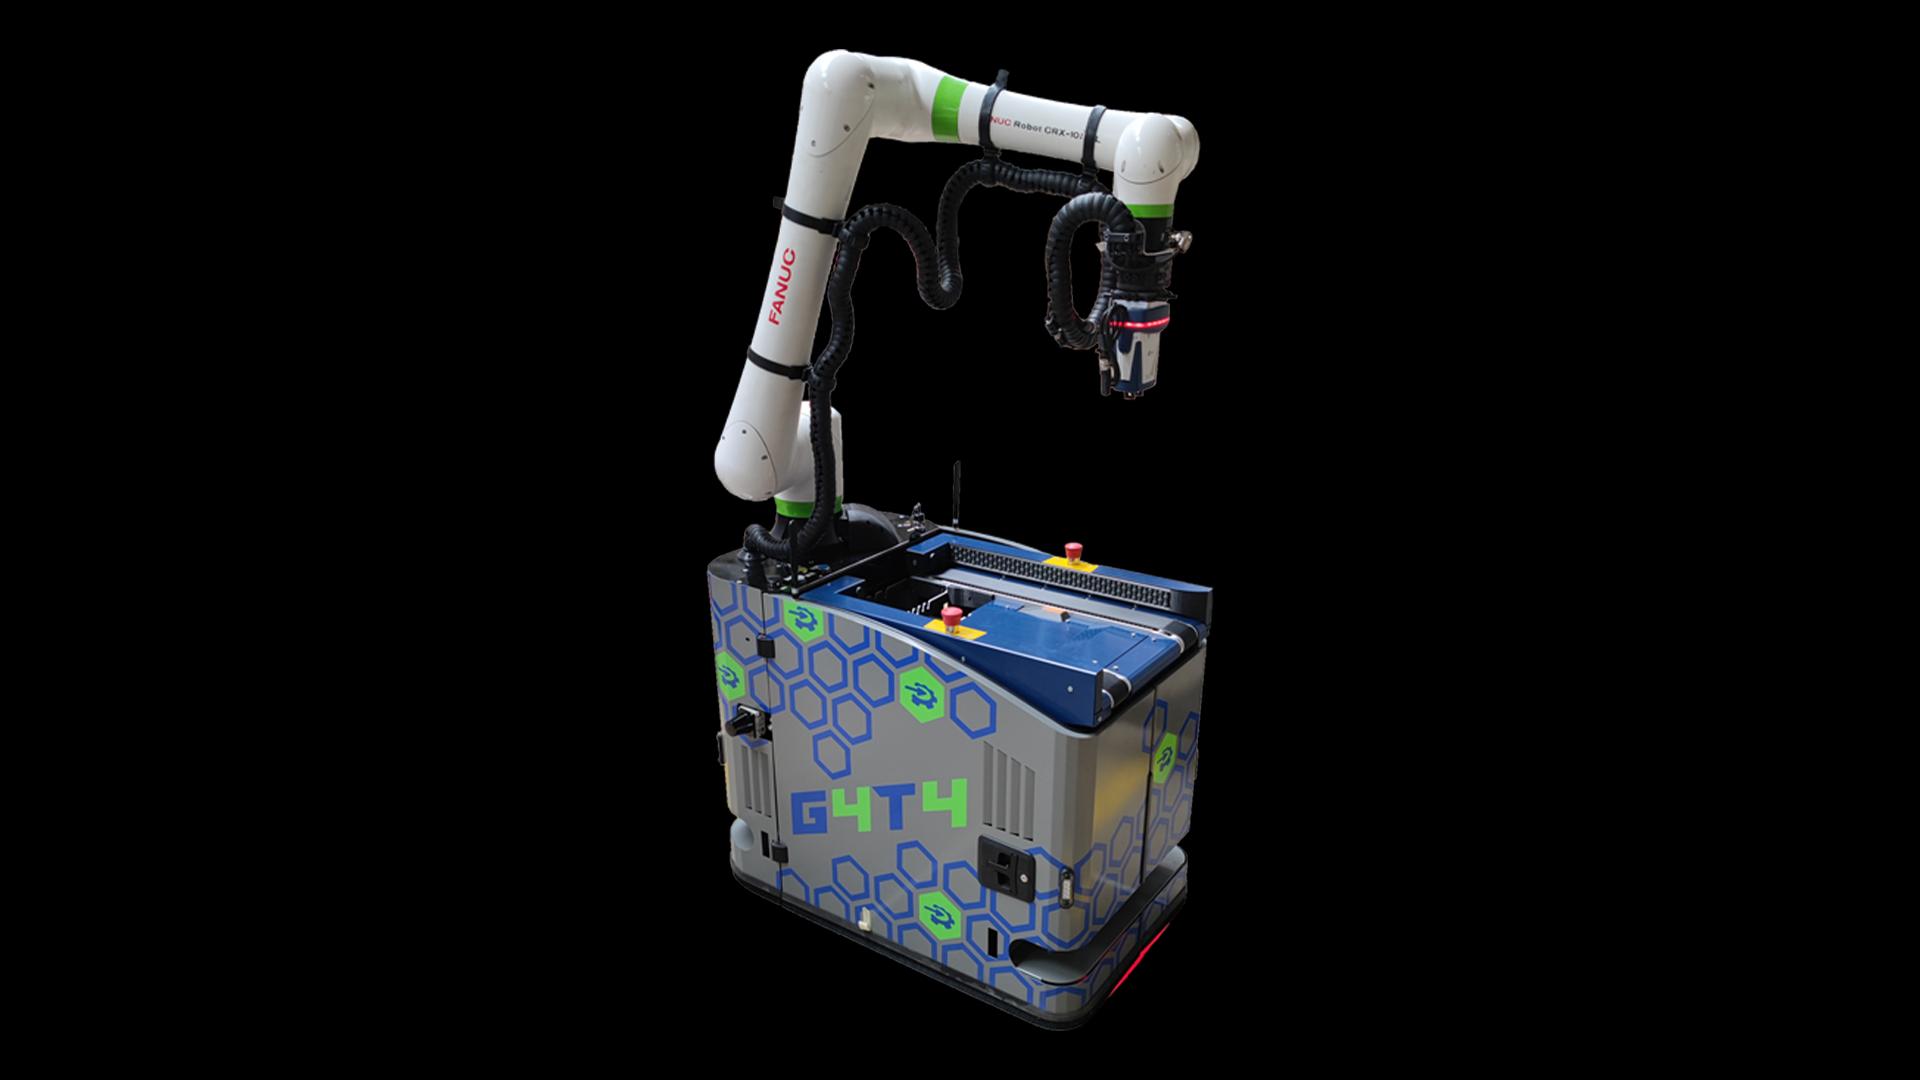 Image of a G4T4 robot